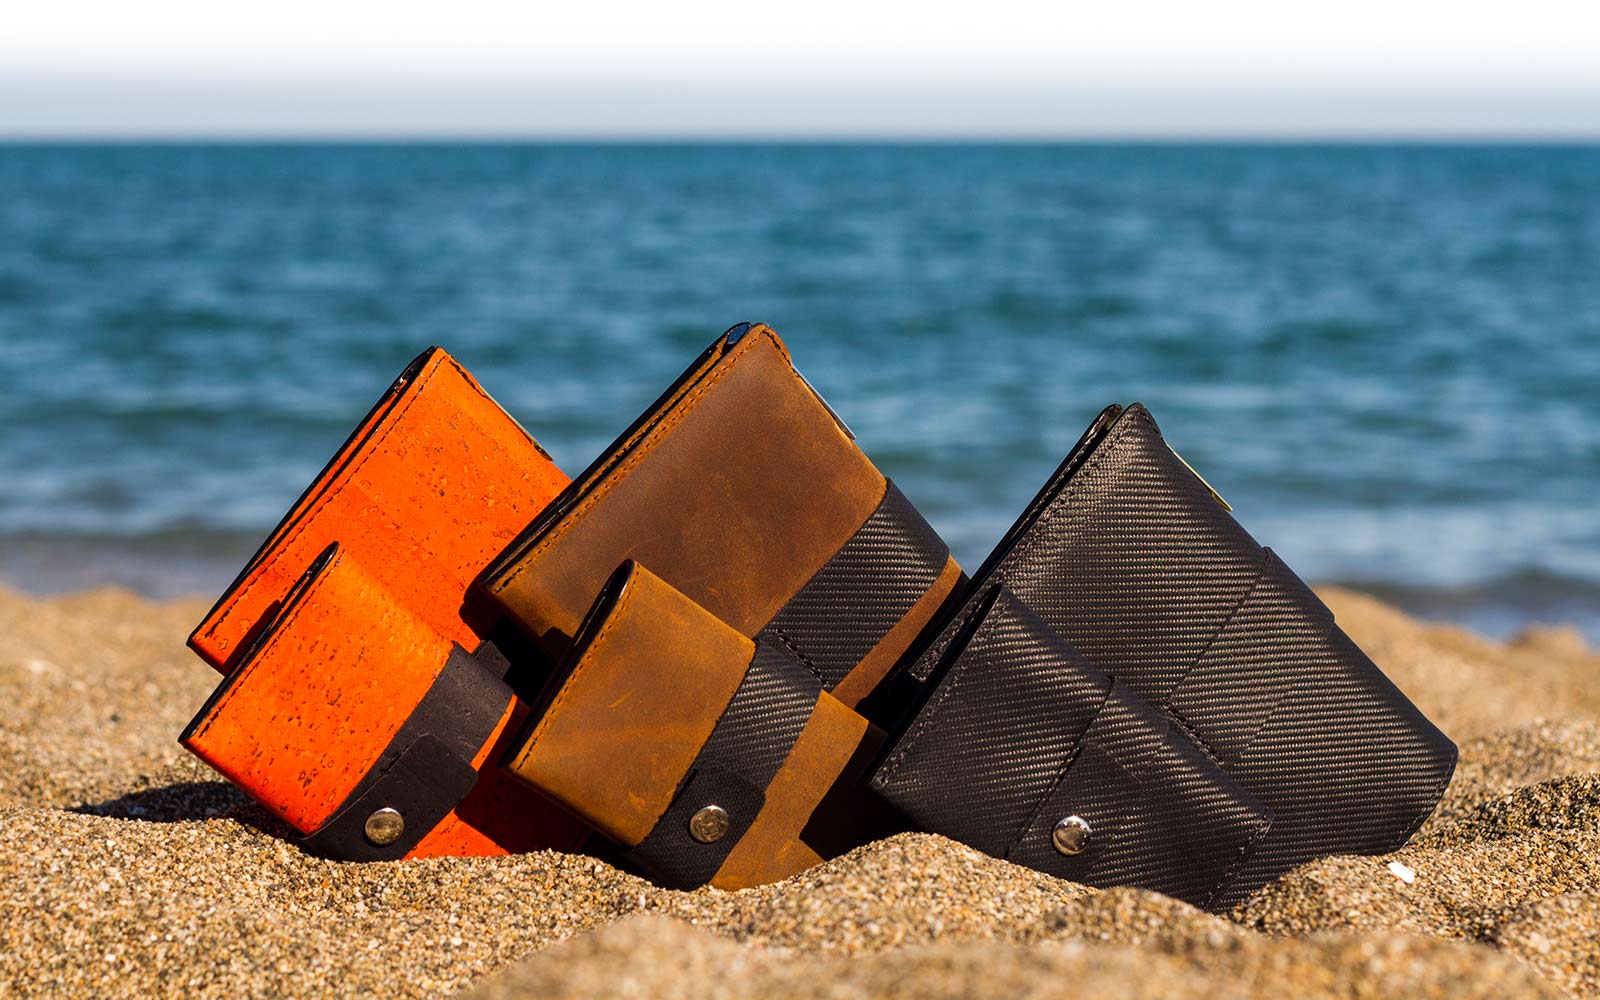 Traveller and Tasca wallets, black, brown and orange, on beach